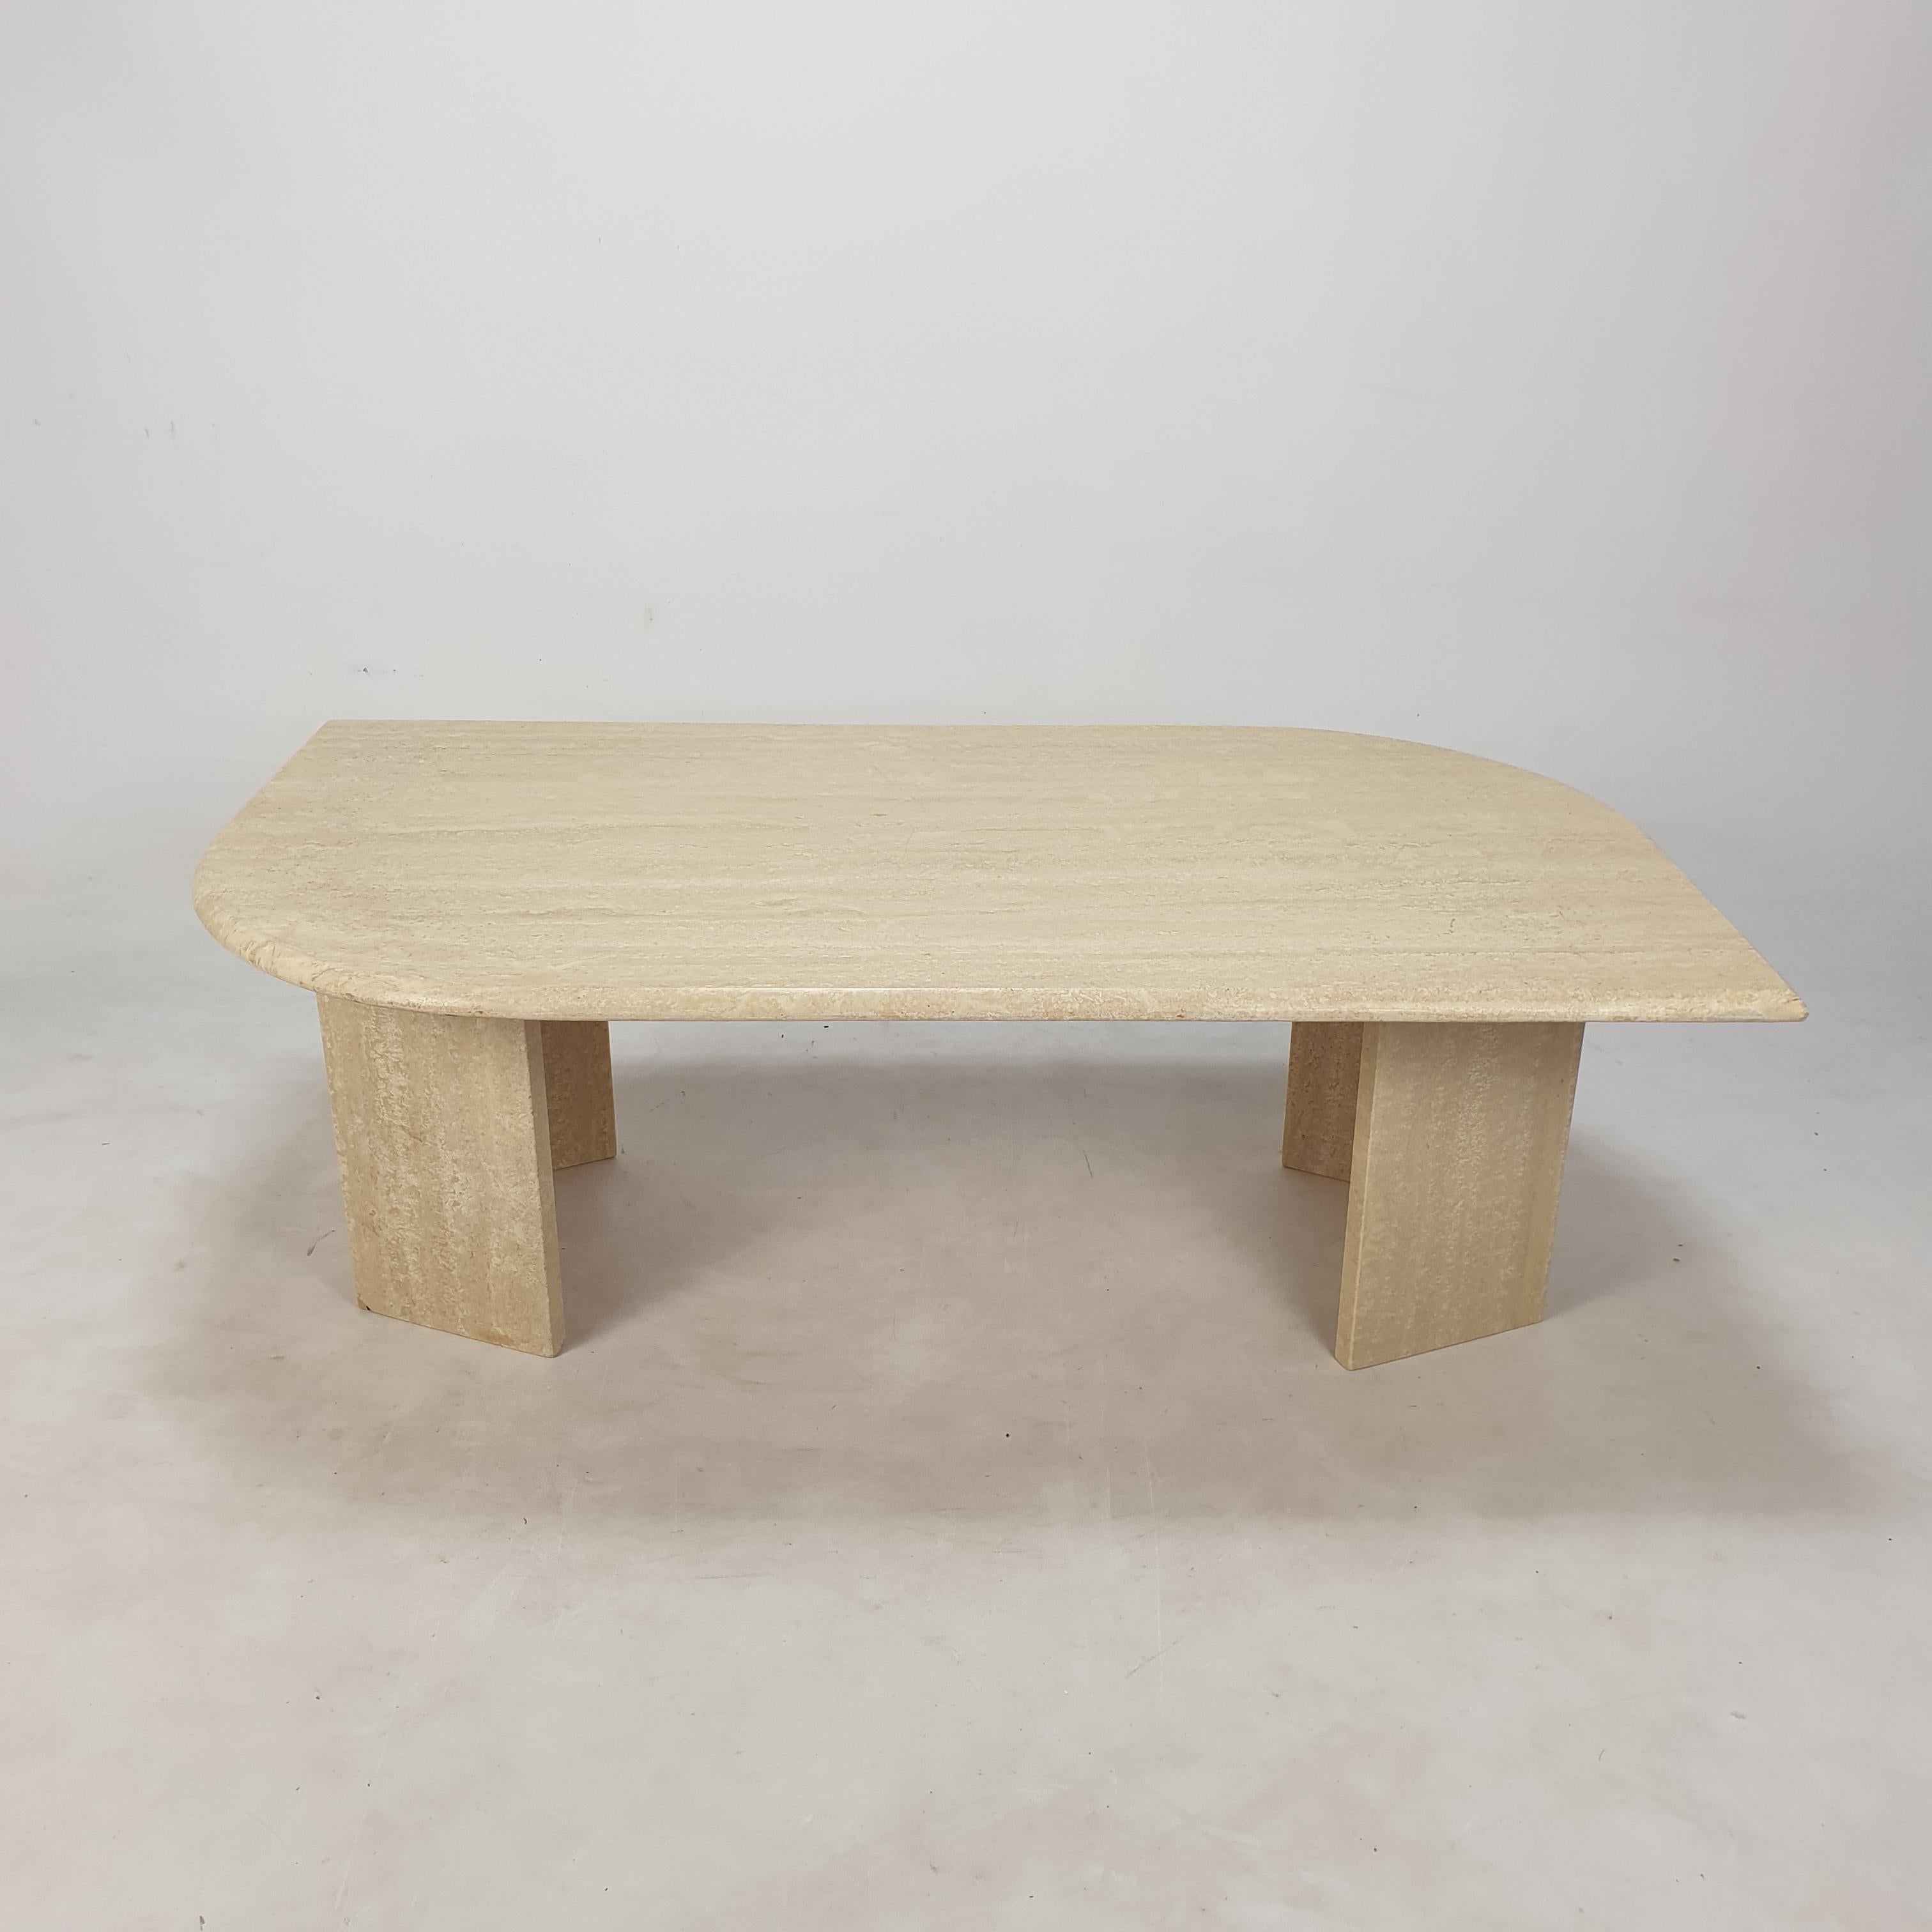 Very elegant Italian coffee table handcrafted out of travertine, 1980's.

The beautiful teardrop shaped top is rounded on the edge. 
It is made of beautiful travertine.

The base is made of two separate pieces.